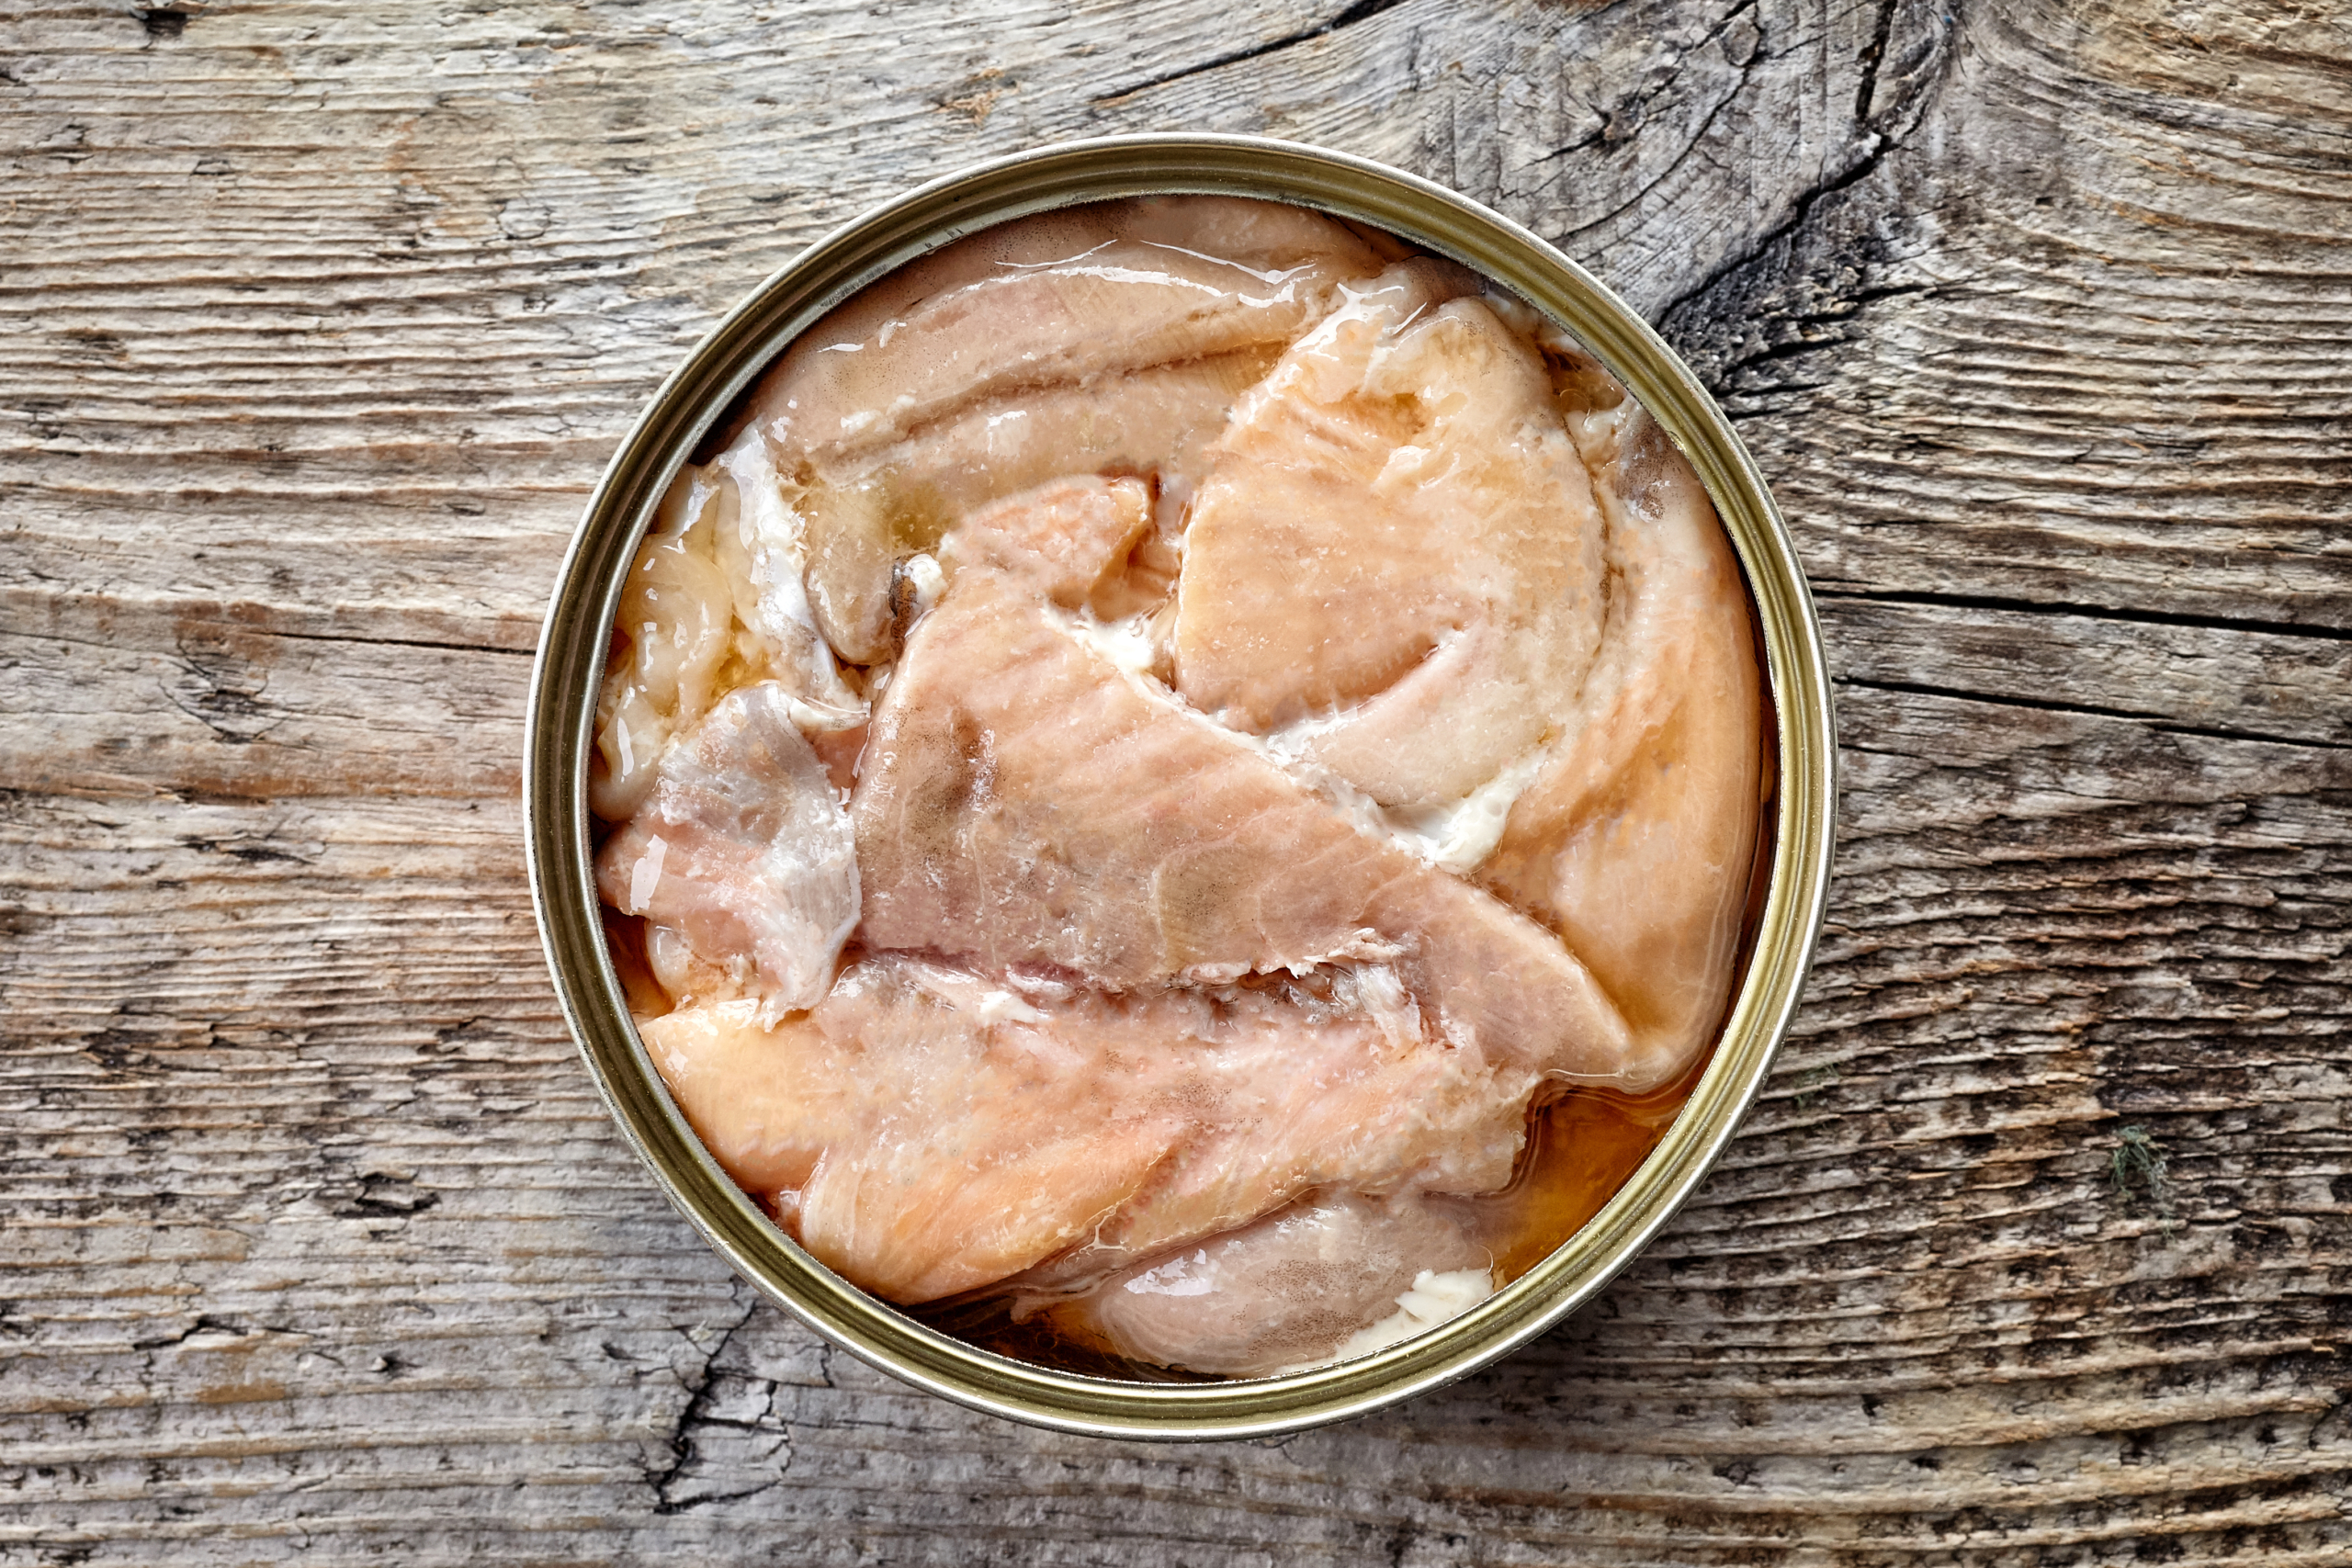 https://www.themanual.com/wp-content/uploads/sites/9/2021/02/the-11-best-canned-salmon-for-a-healthy-lifestyle-in-2021-scaled.jpg?fit=2560%2C1707&p=1